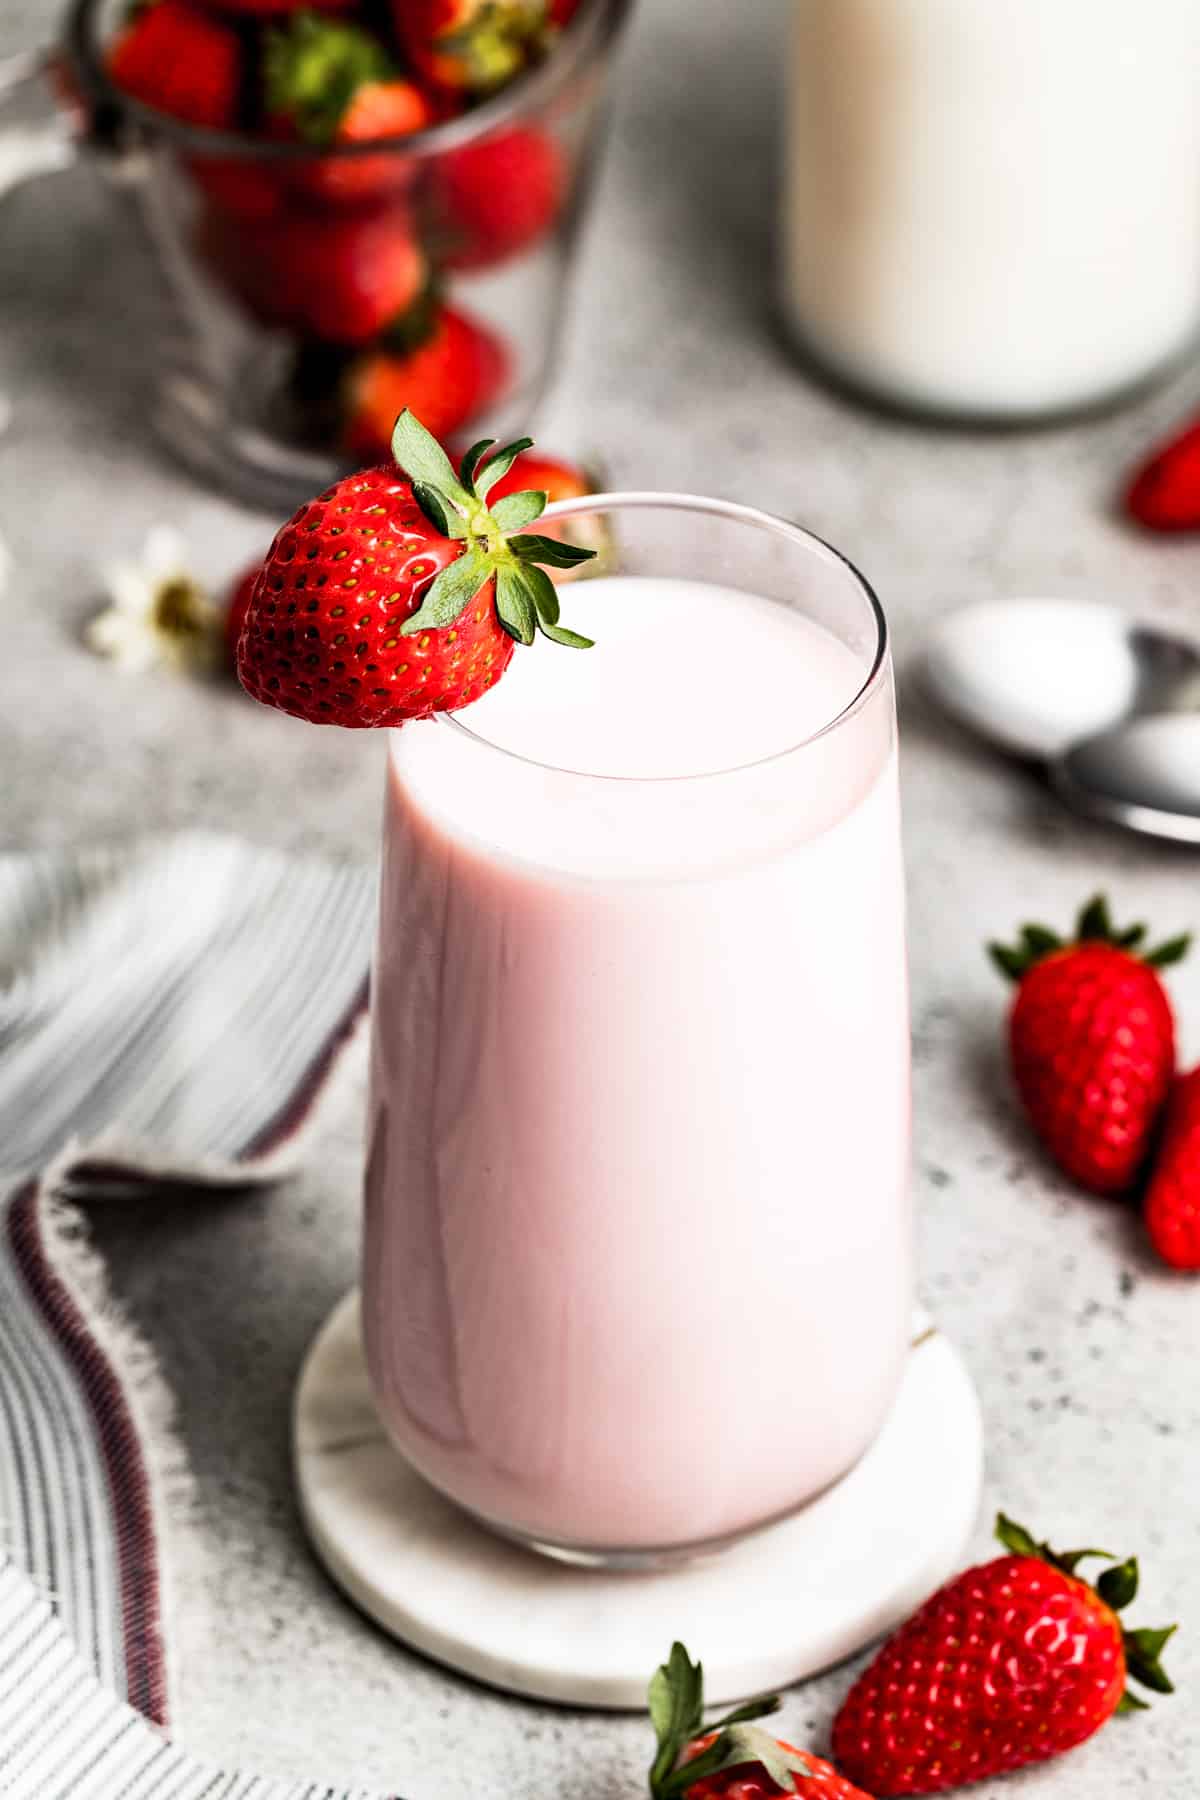 Strawberry milk in a glass with a strawberry on the edge of the glass, and fresh strawberries arranged around the glass of milk.